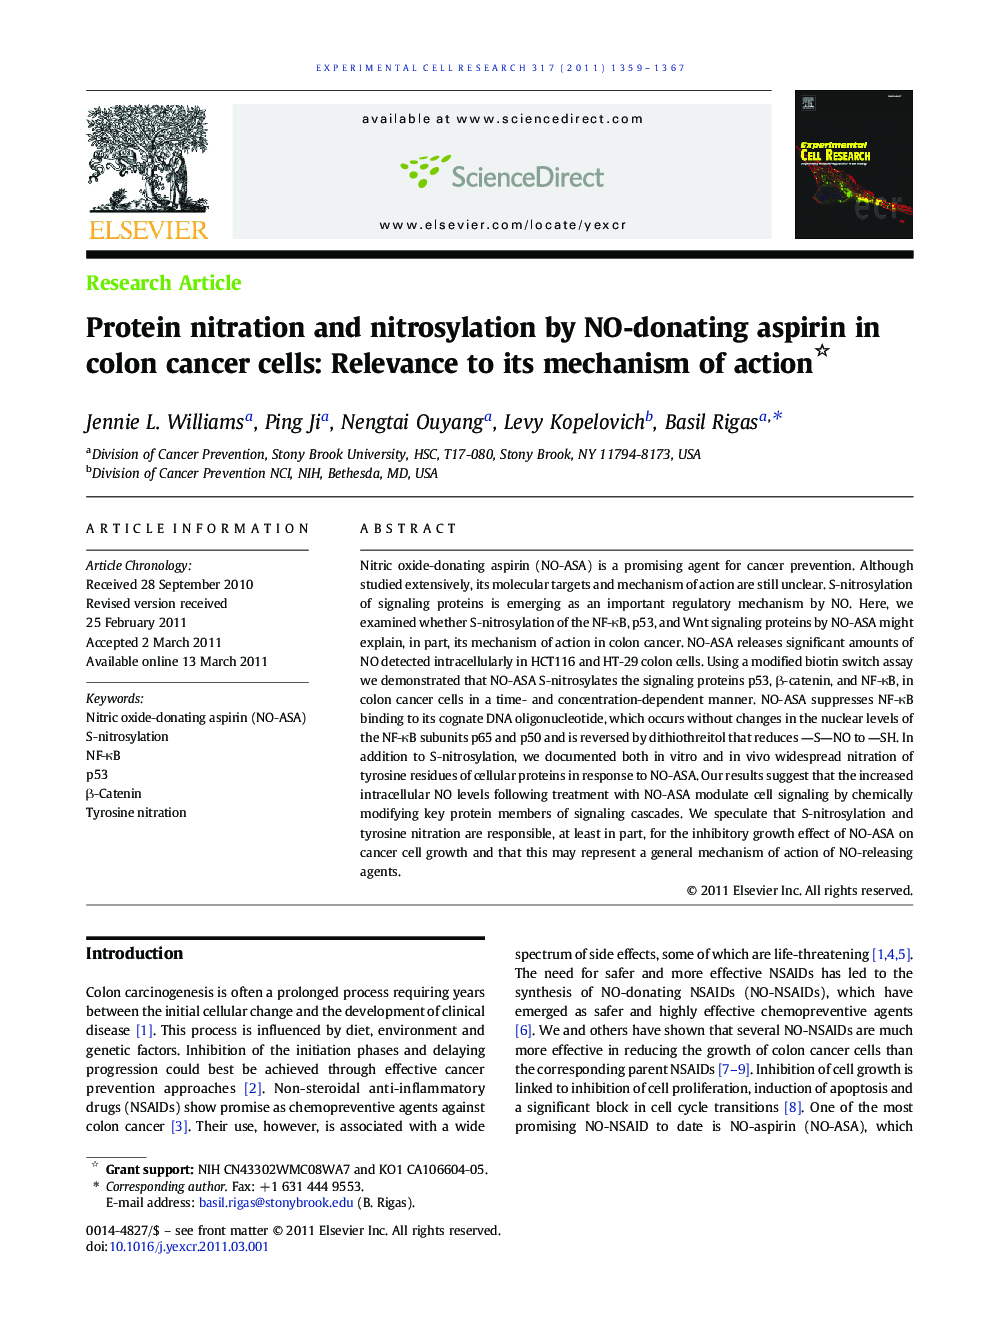 Protein nitration and nitrosylation by NO-donating aspirin in colon cancer cells: Relevance to its mechanism of action 